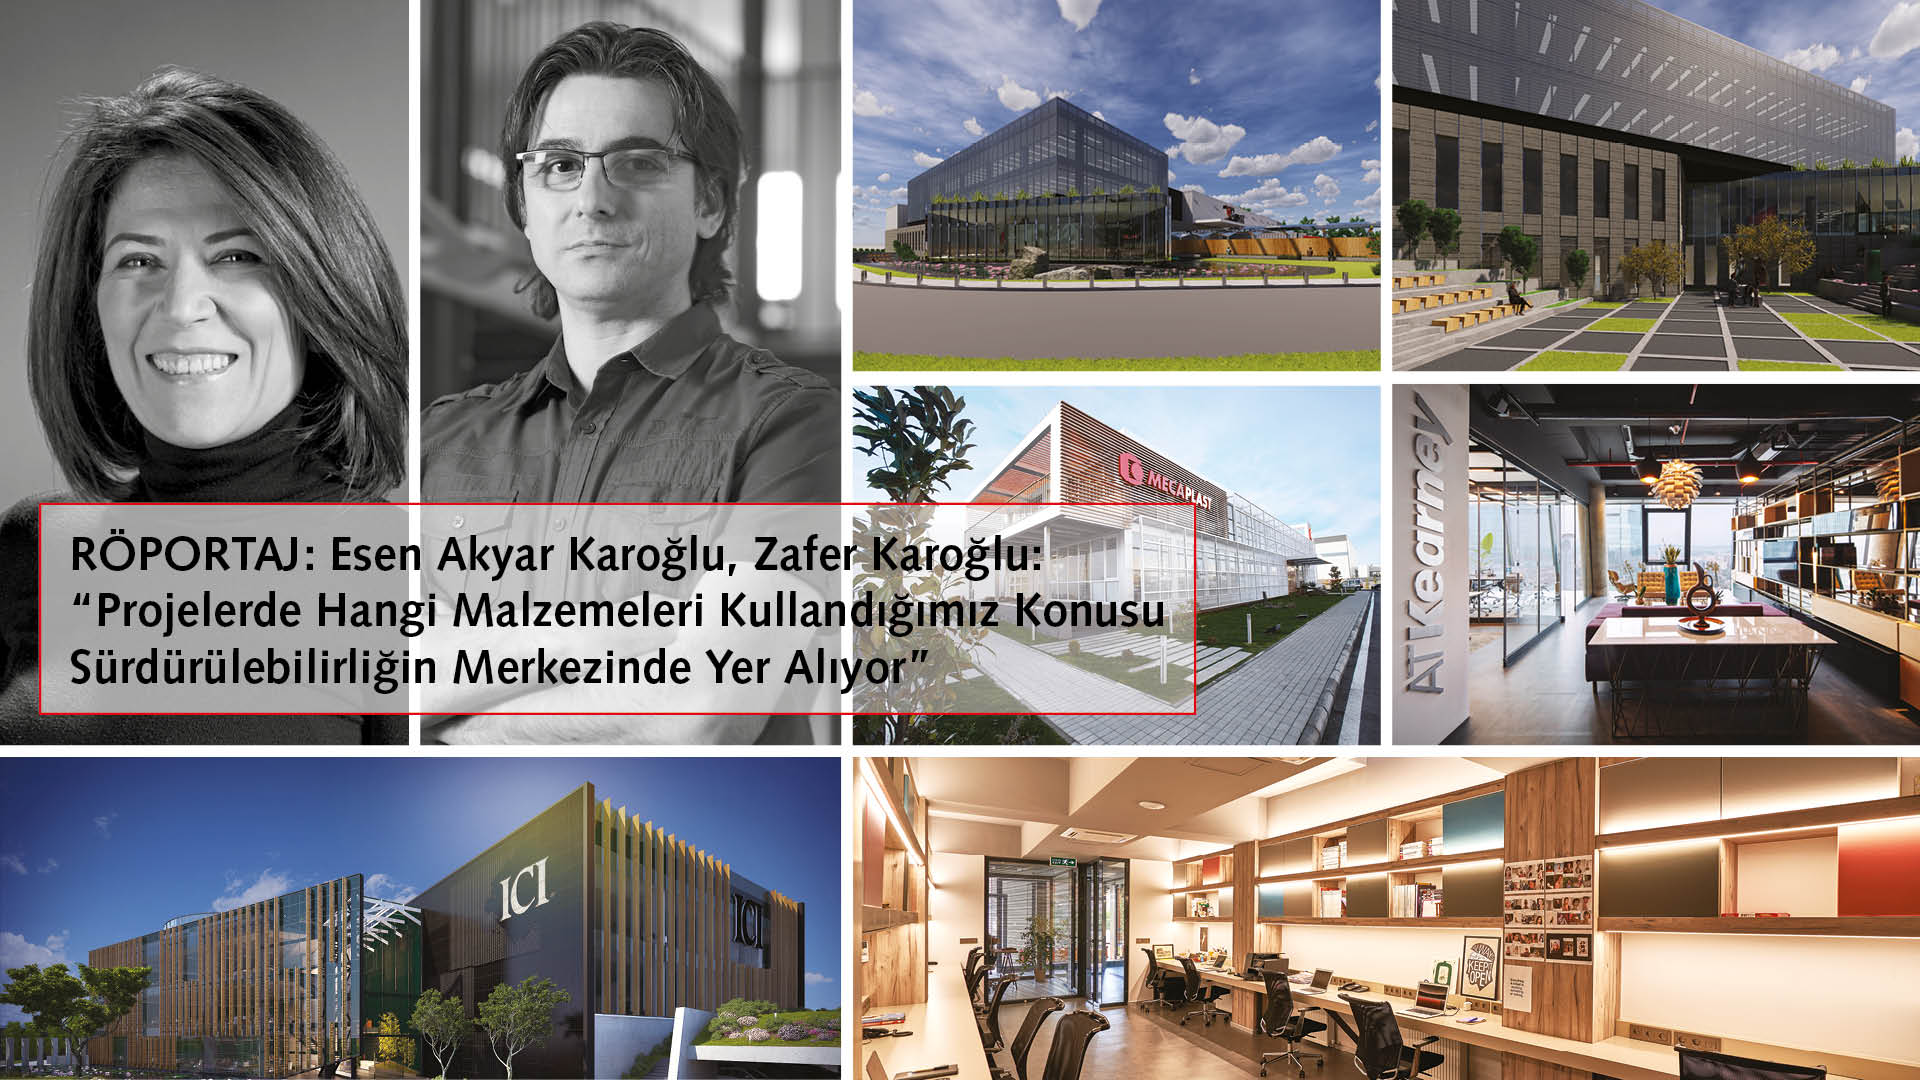 ESEN AKYAR KAROĞLU, ZAFER KAROĞLU: “SUSTAINABILITY IS AT THE HEART OF HOW WE DECIDE WHAT MATERIALS WE ARE GOING TO USE IN OUR PROJECTS”